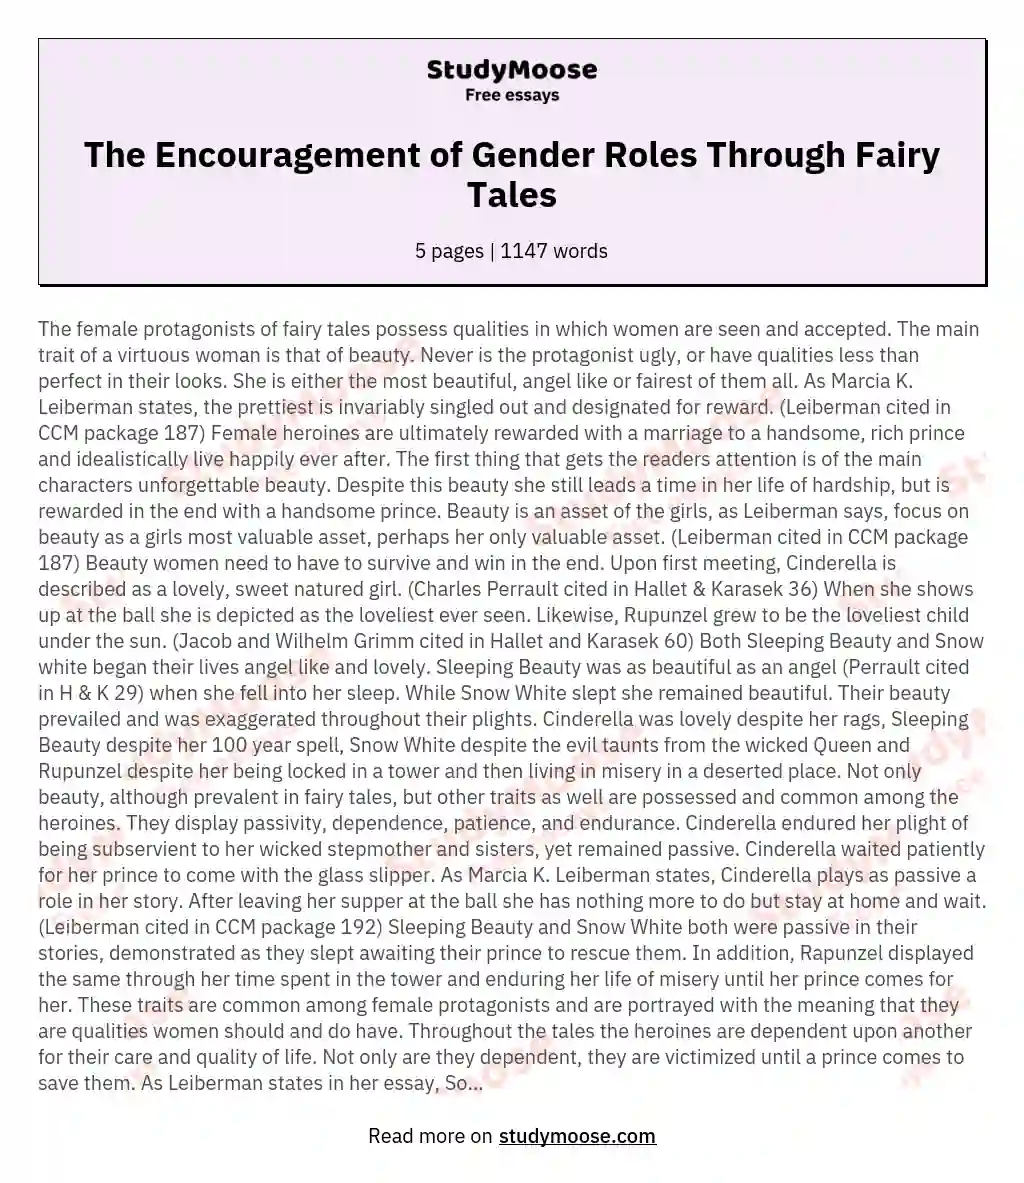 The Encouragement of Gender Roles Through Fairy Tales essay